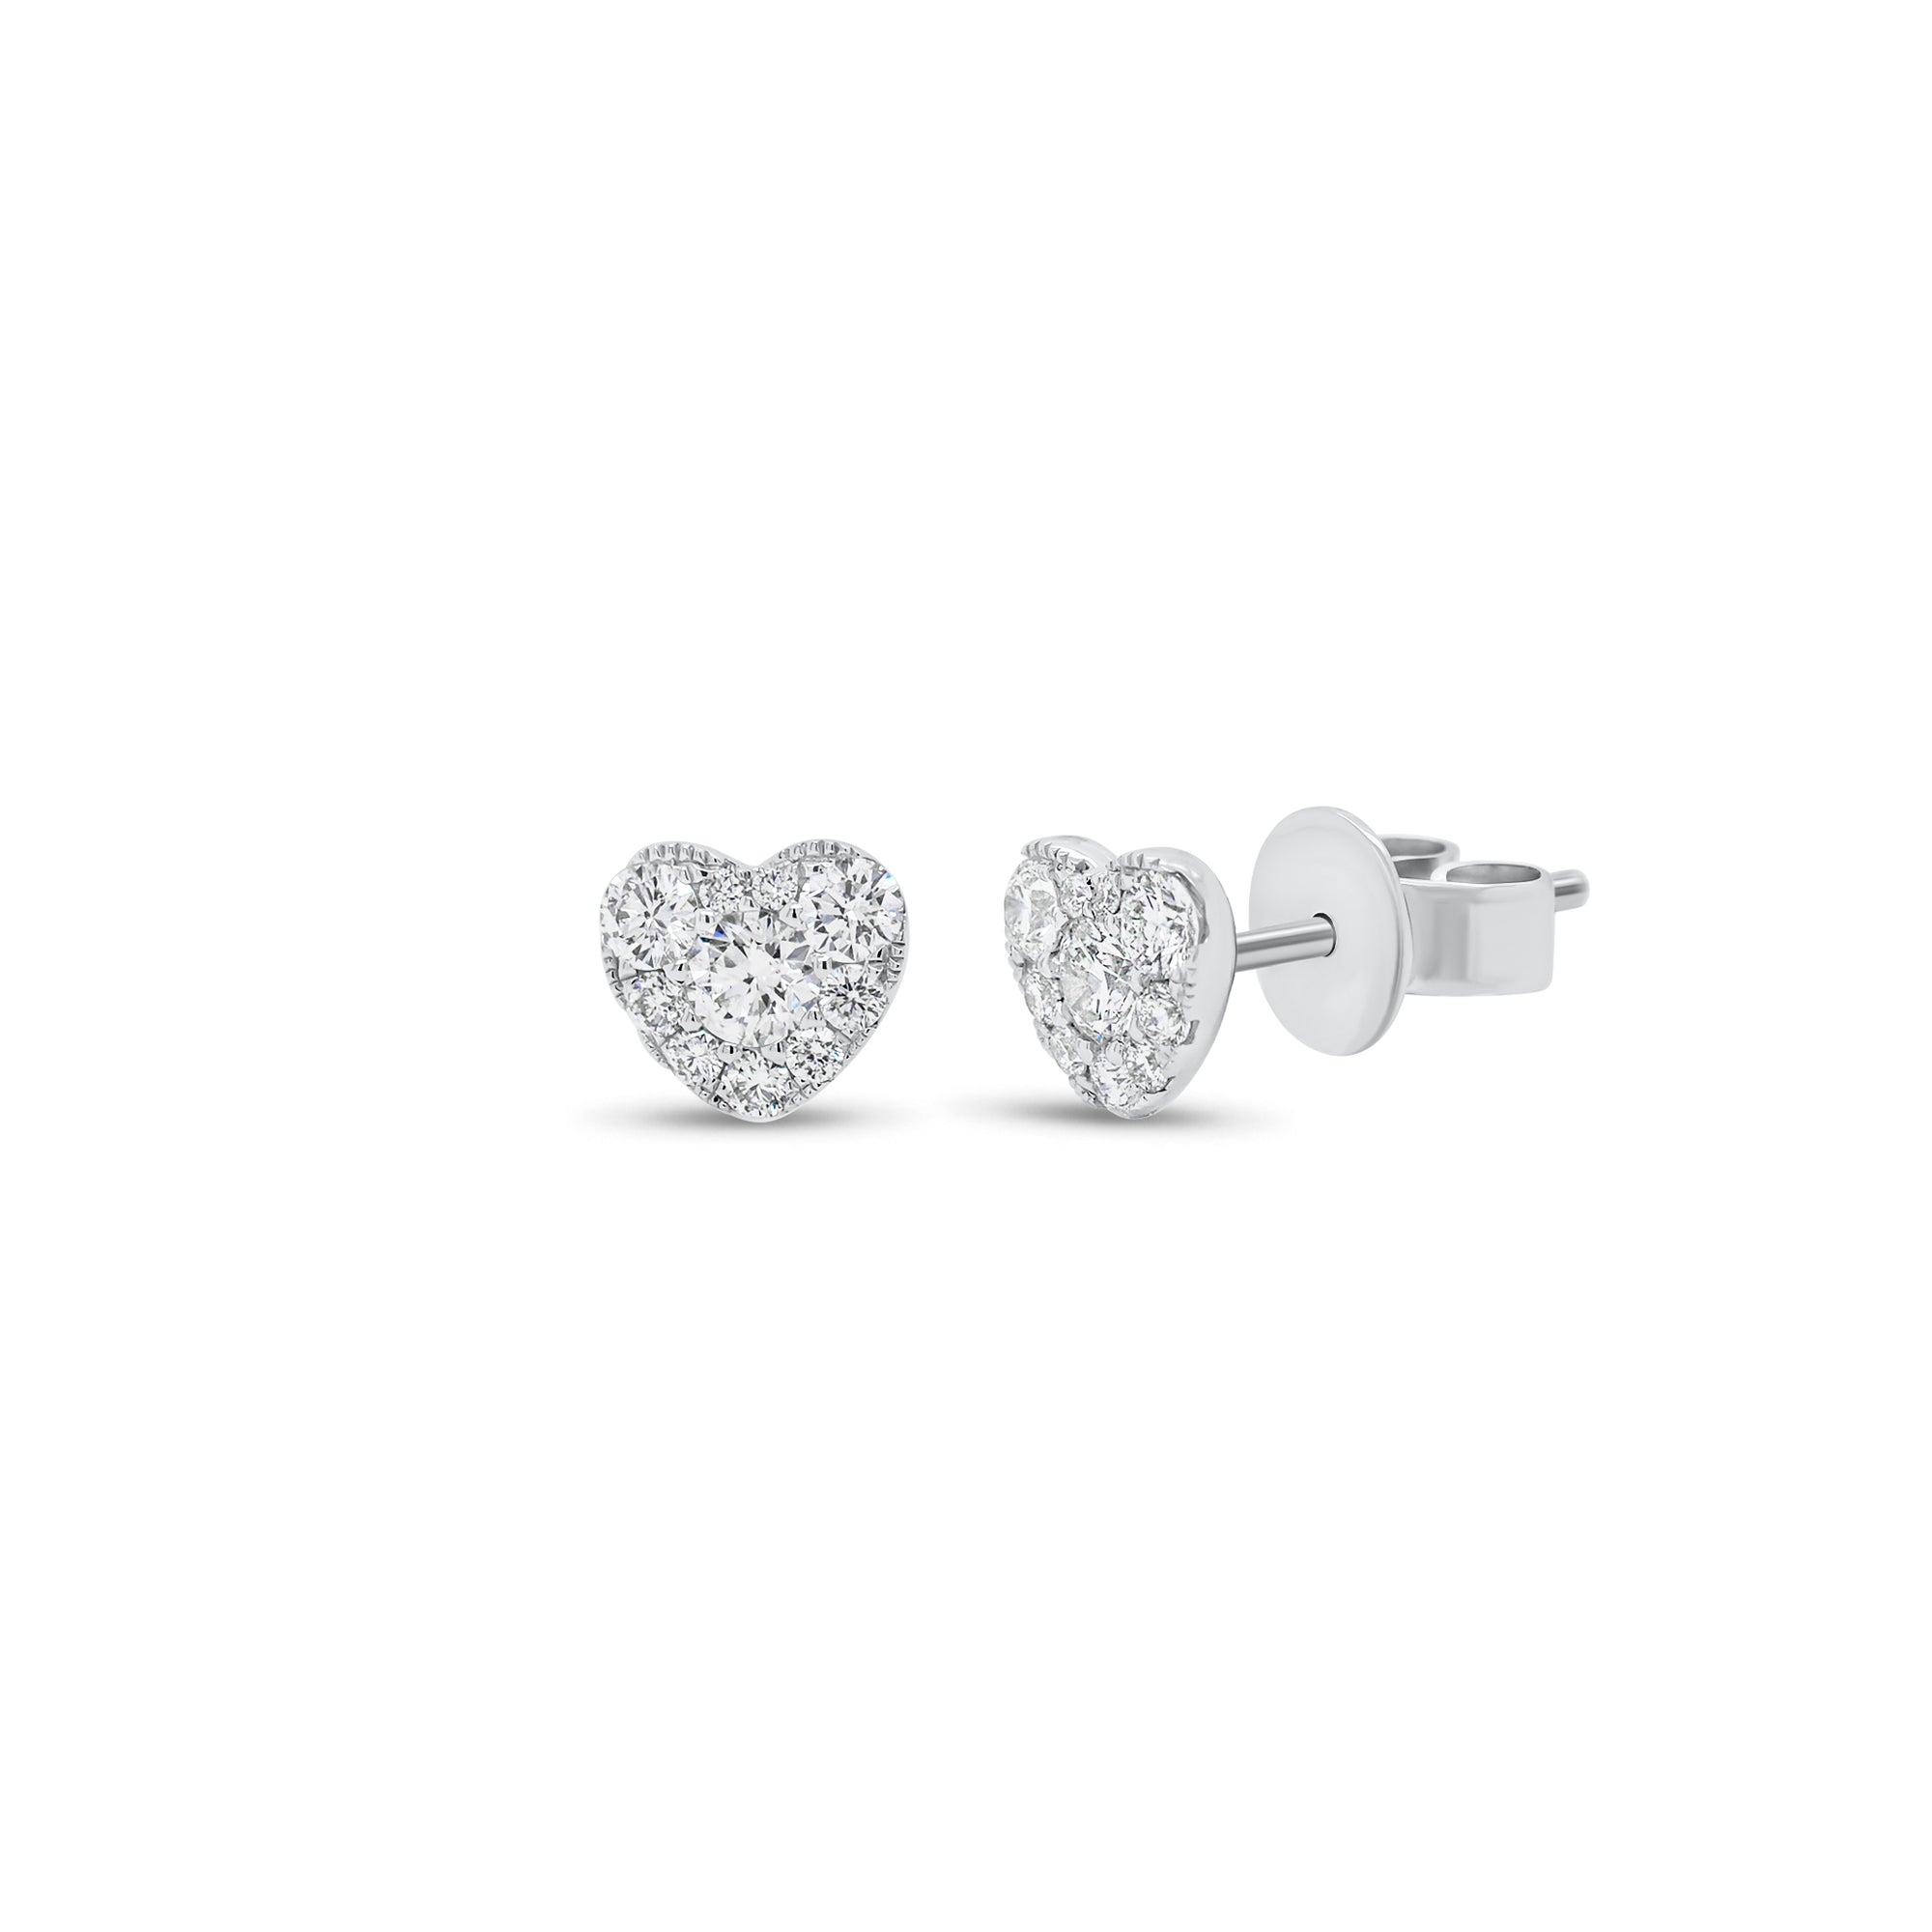 Diamond Cluster Heart Stud Earrings - 18K gold weighing 1.73 grams  - 20 round diamonds weighing 0.50 carats